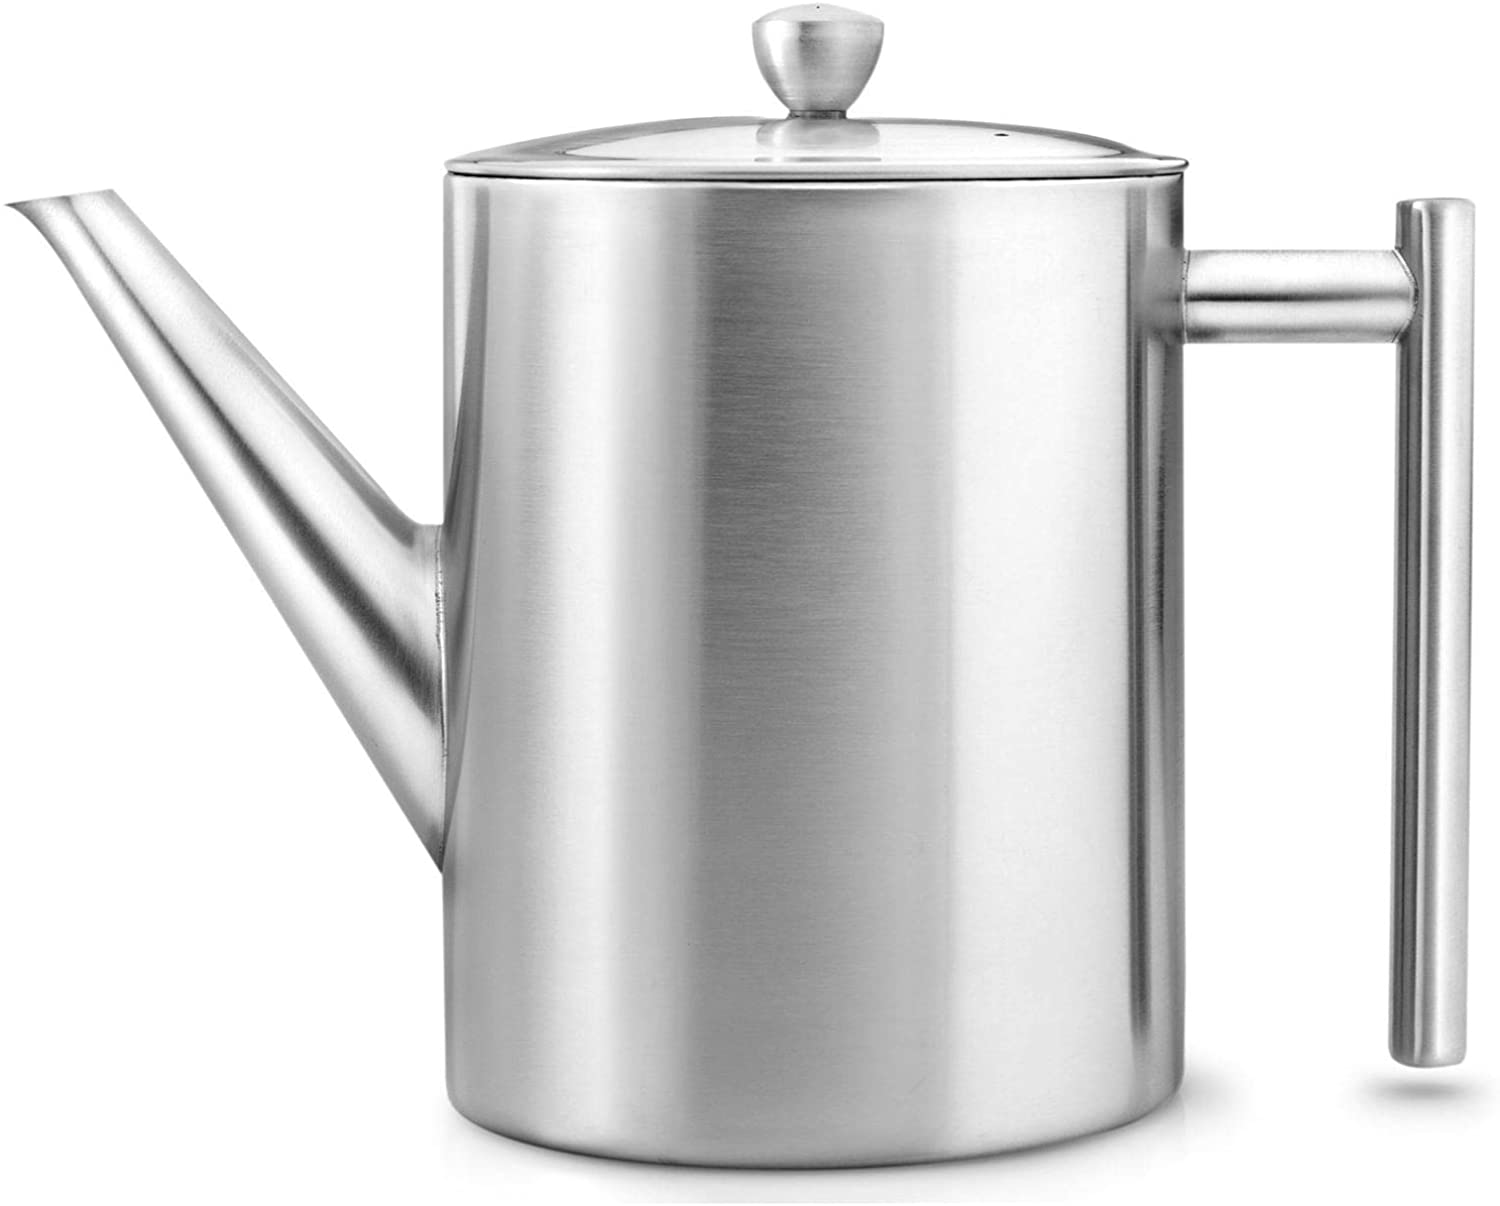 Bredemeijer 1.2 L Stainless Steel Teapot Cylindre Satin Finish, Silver